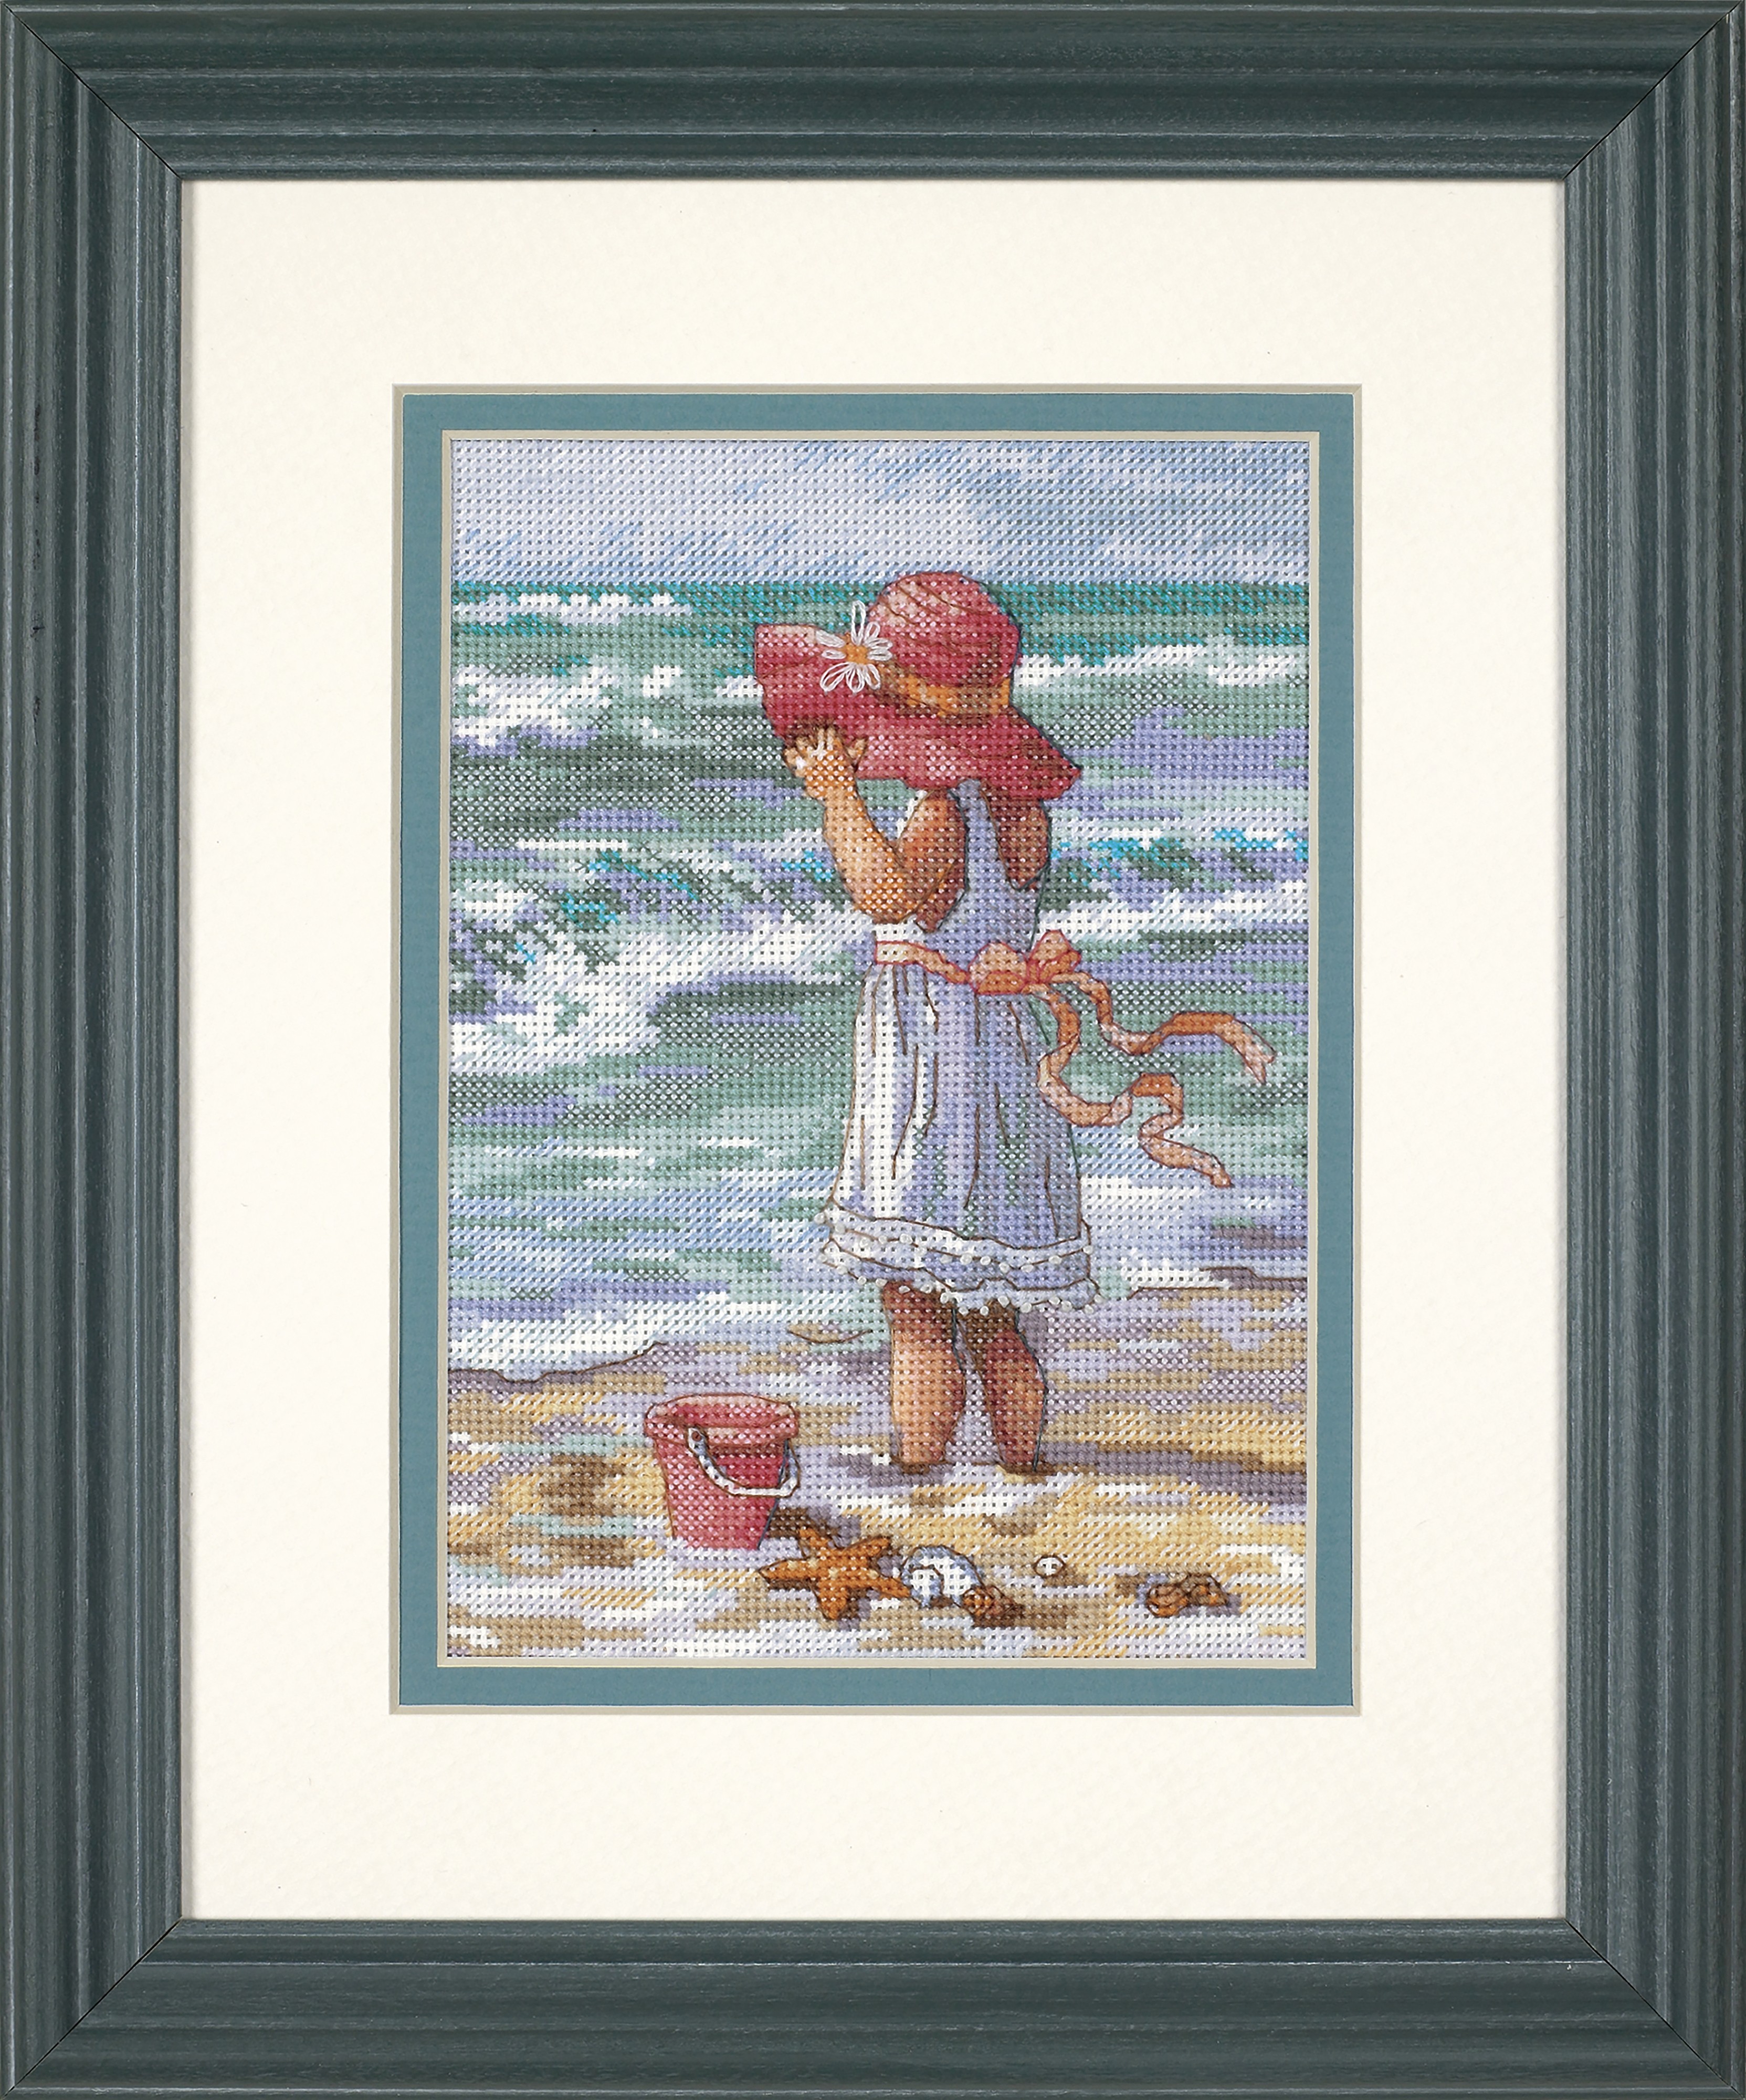 The Gold Collection Petites: Girl at the Beach